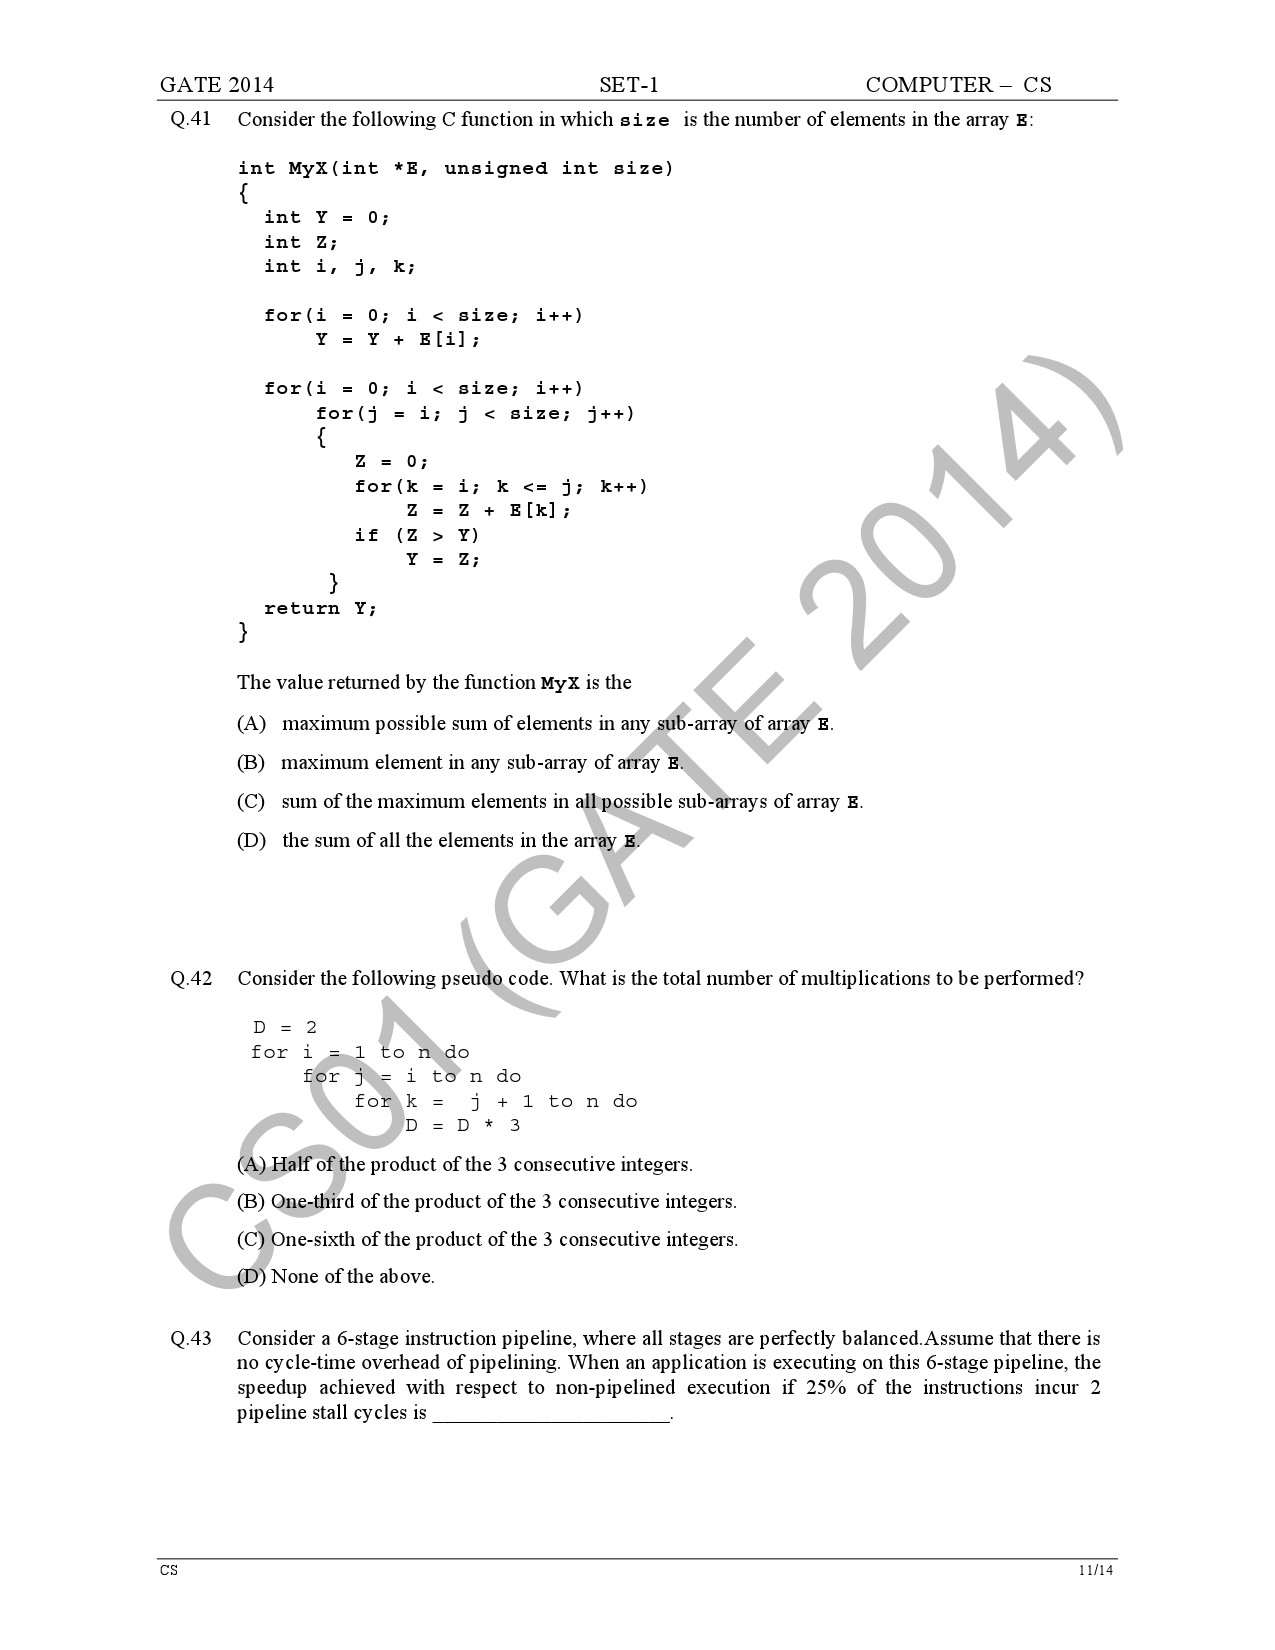 GATE Exam Question Paper 2014 Computer Science and Information Technology Set 1 17